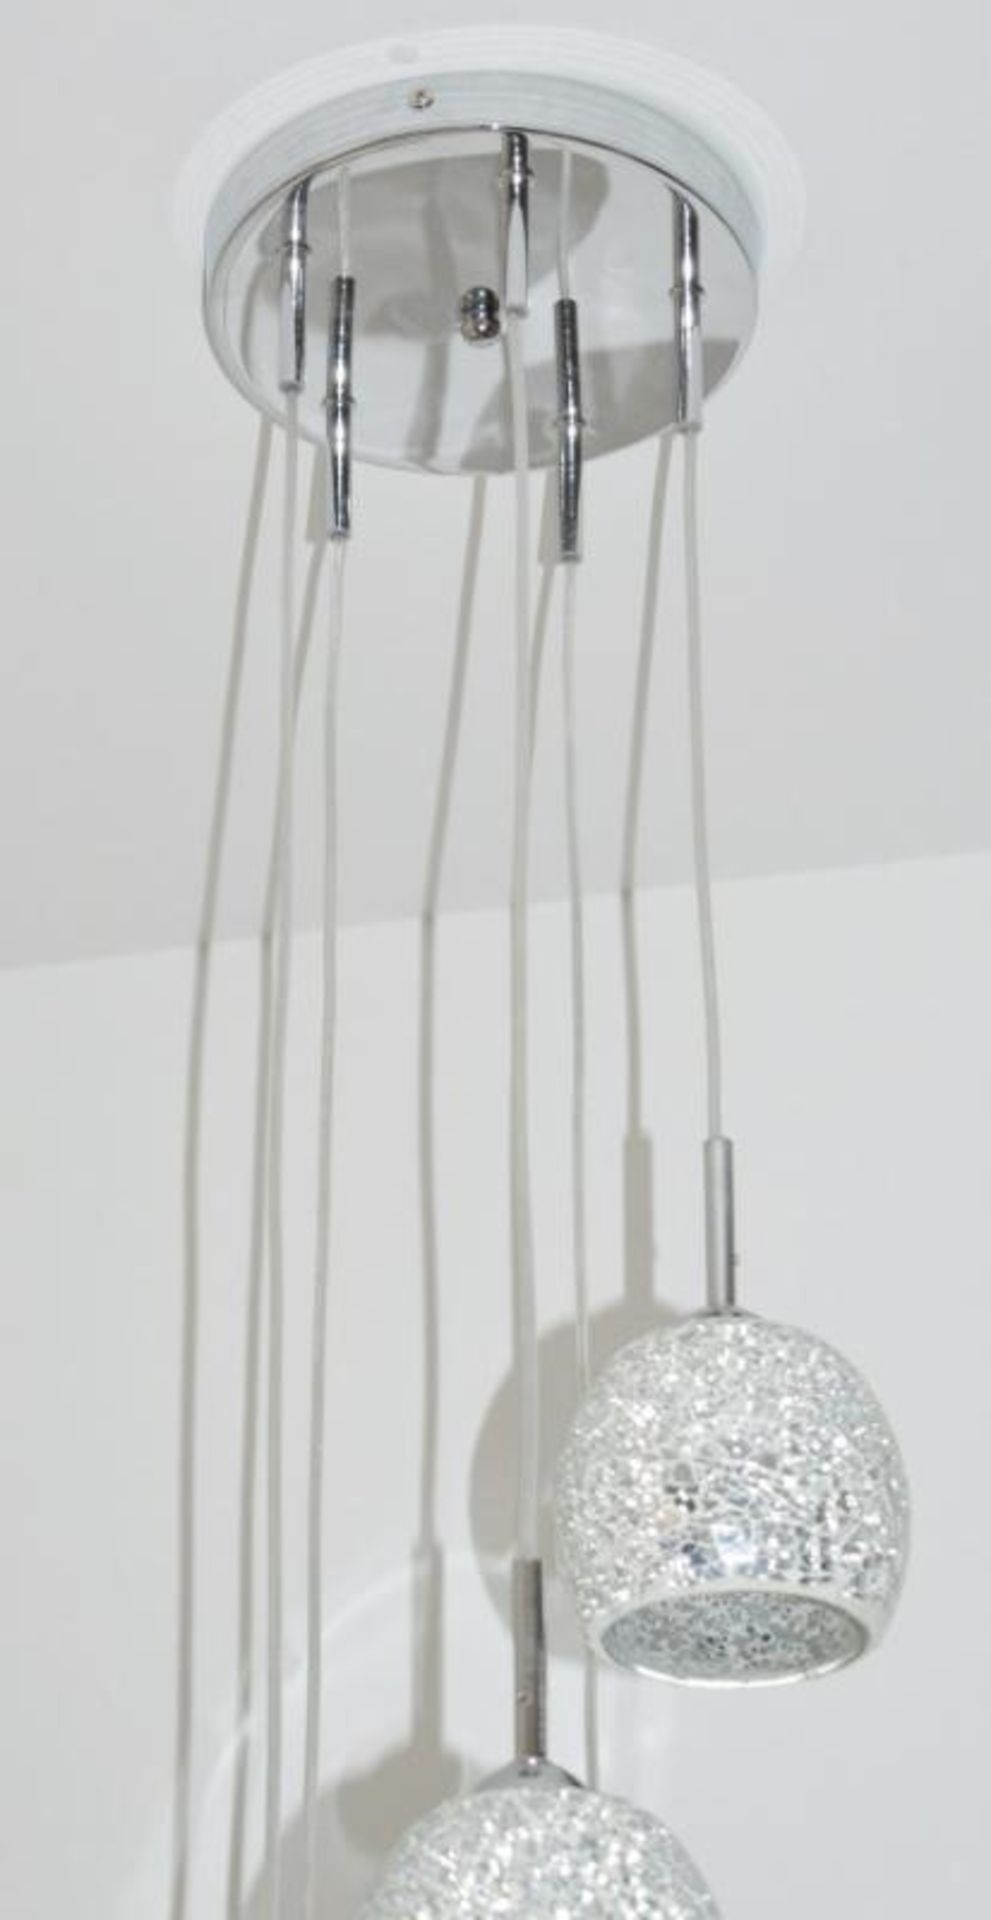 1 x Crackle White Mosaic Glass Shade 5-Light Fitting With Adjustable Height - Ex Display Stock - CL2 - Image 6 of 6